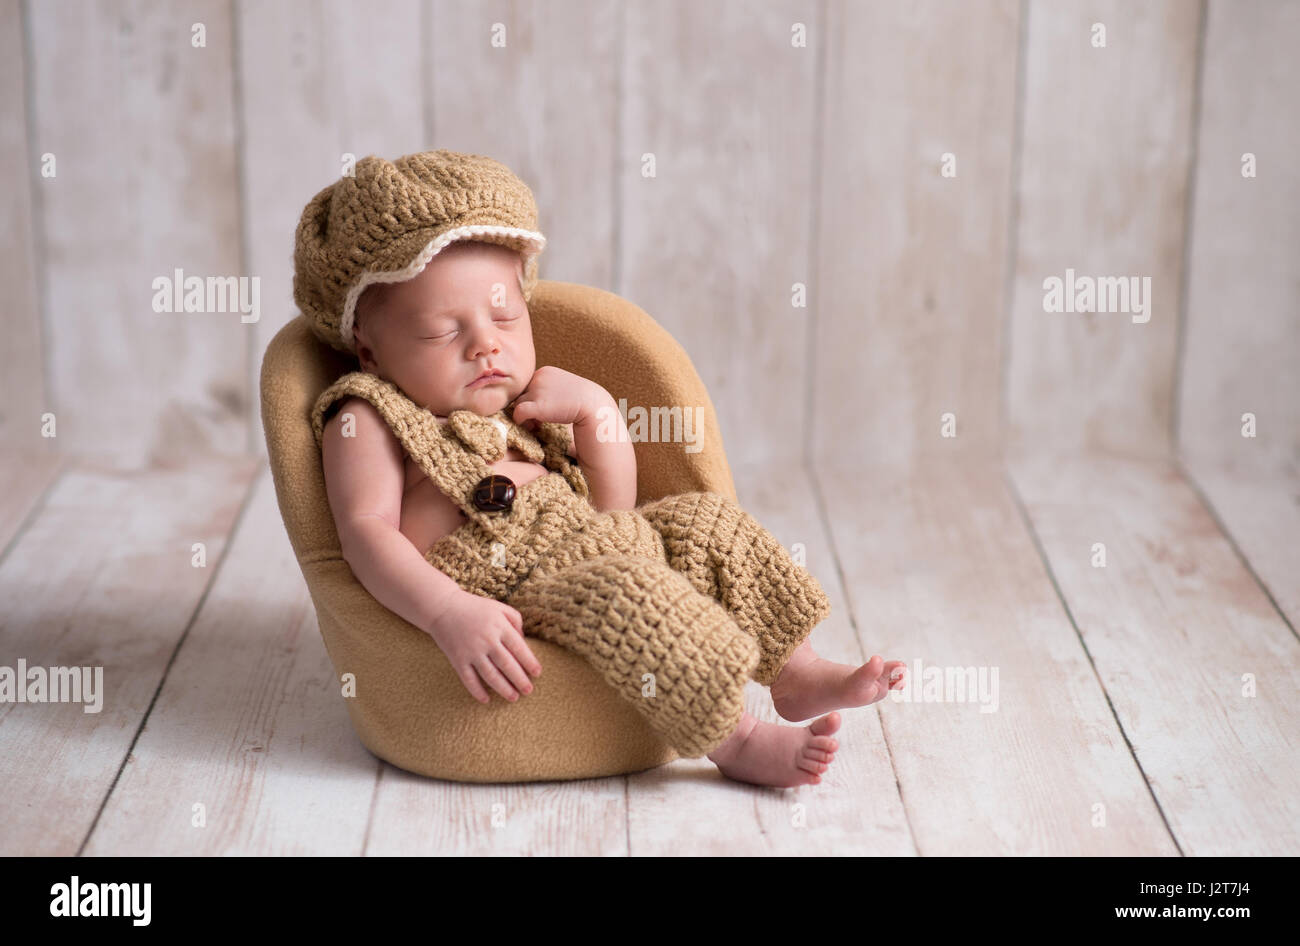 Nine day old, newborn baby boy wearing a crocheted, little man suit with newsboy cap and bowtie. He is sleeping in a tiny chair with a fist under his  Stock Photo